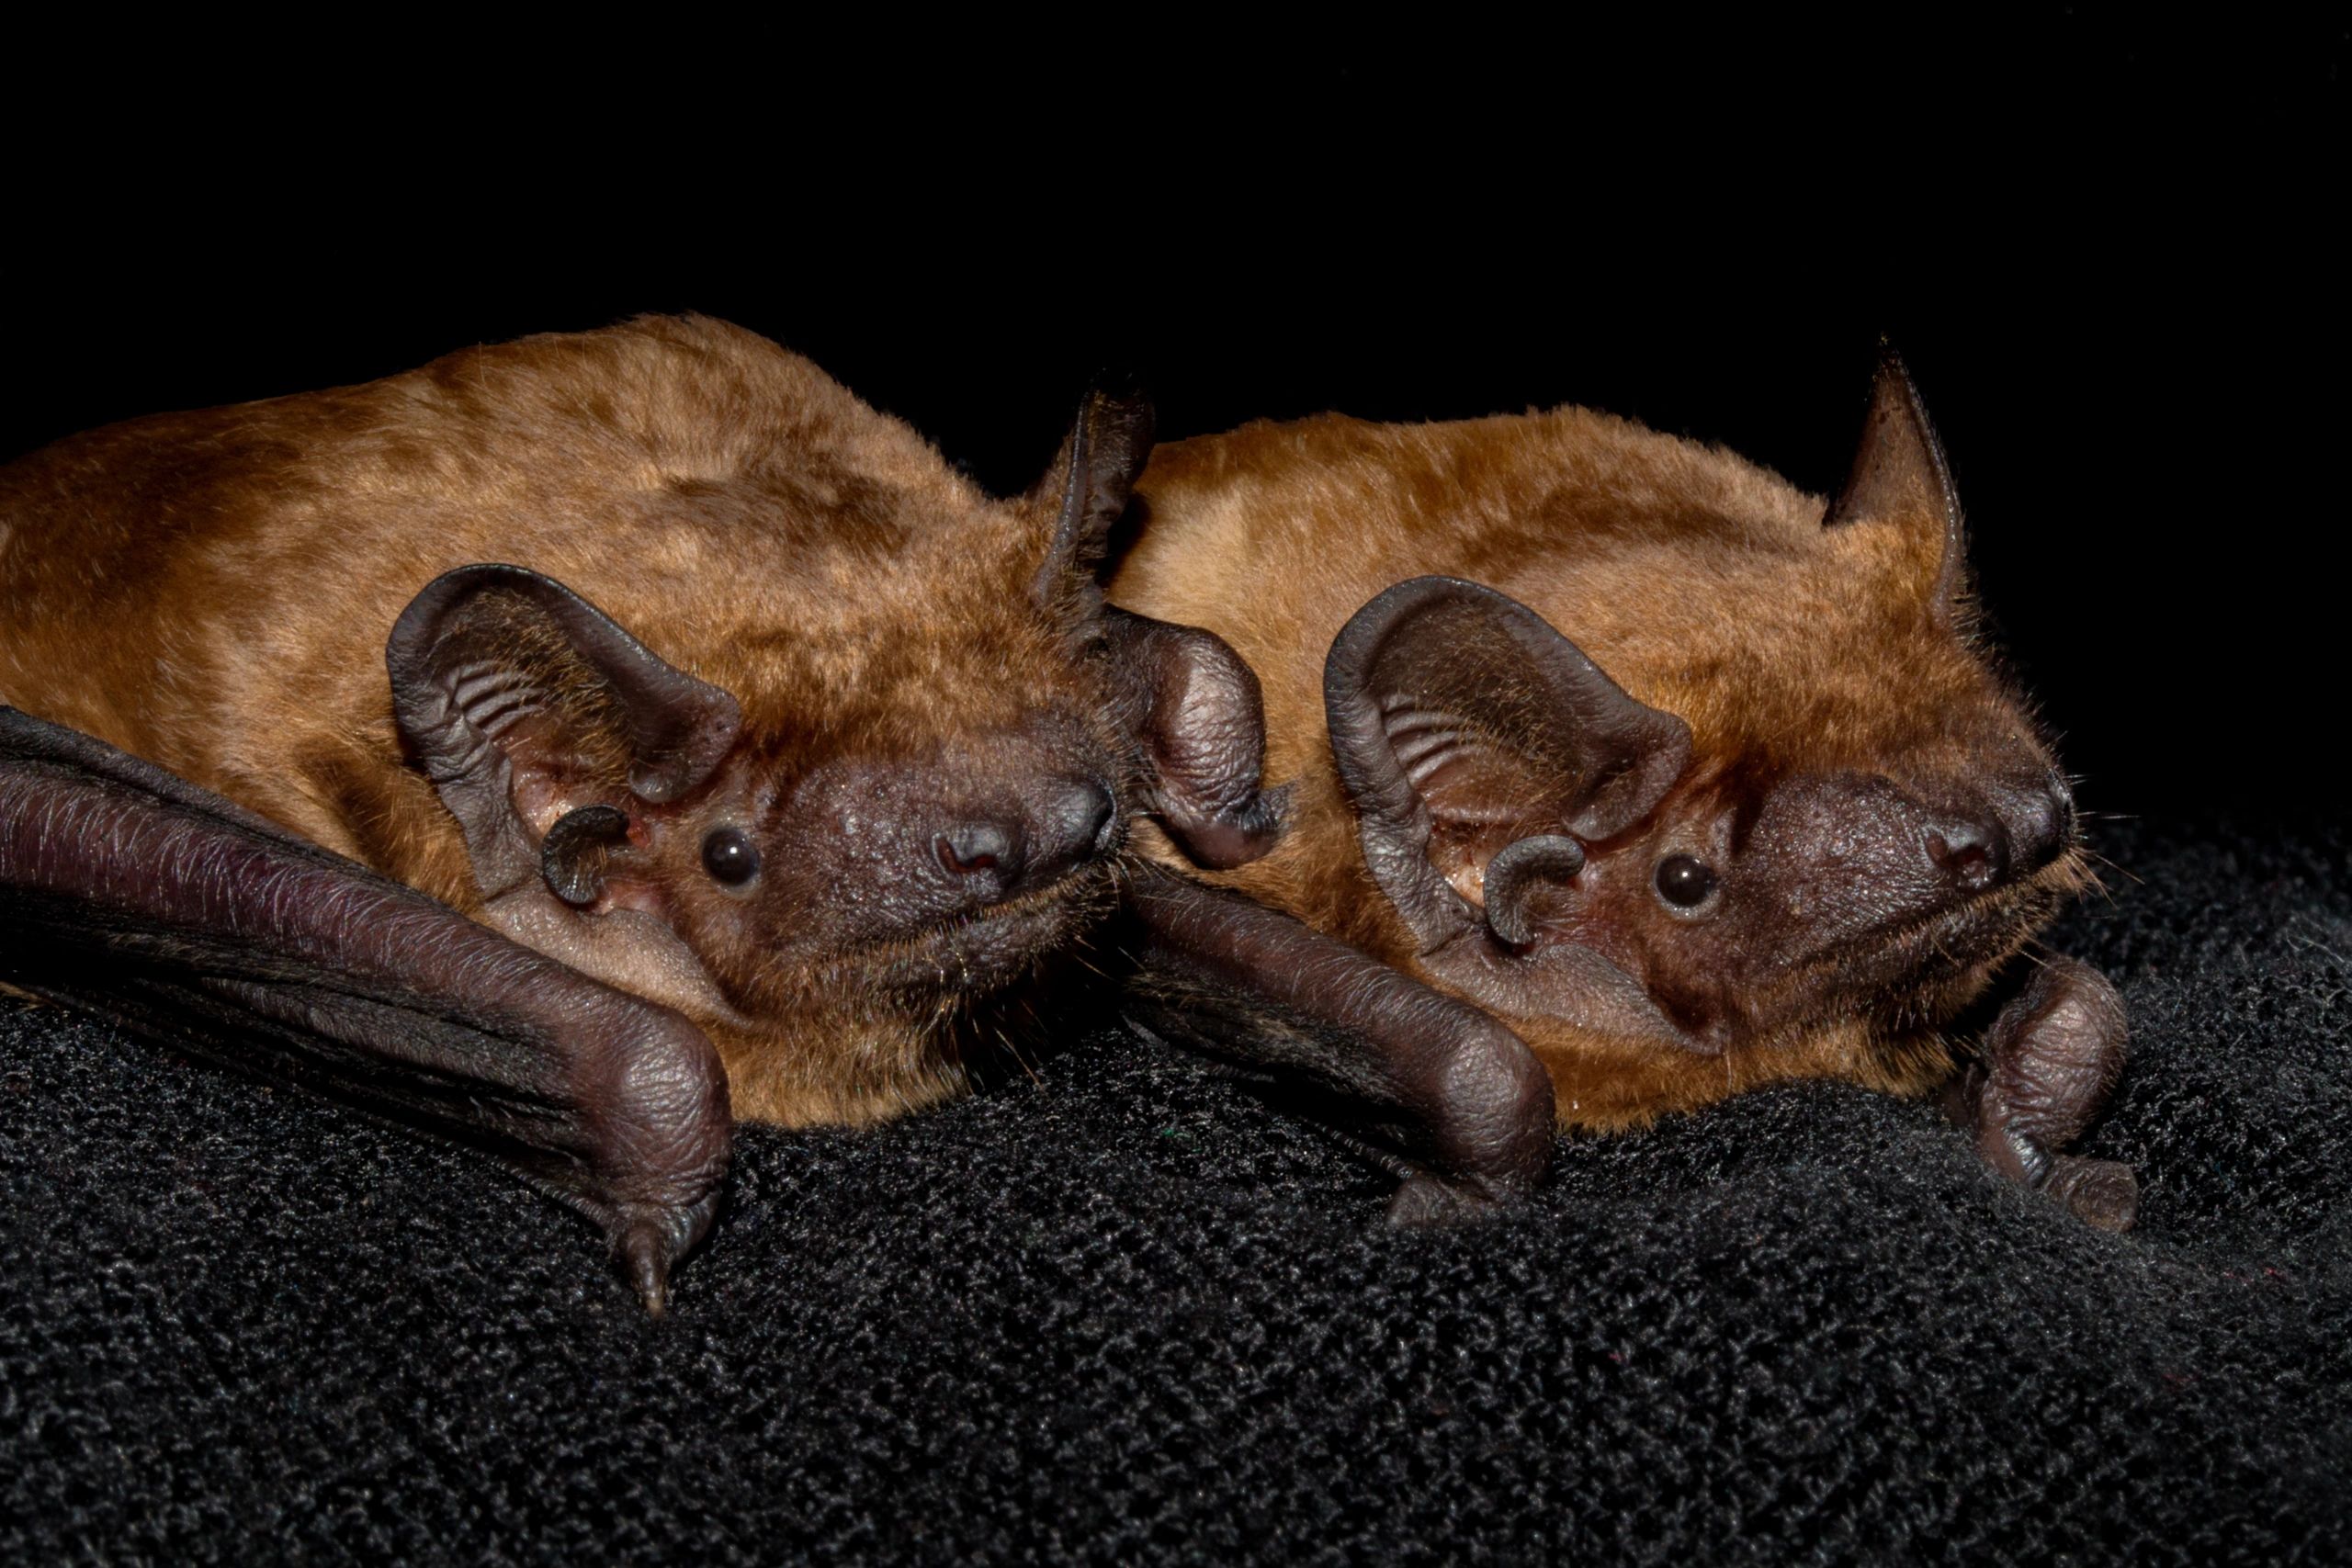 Two rescued bats